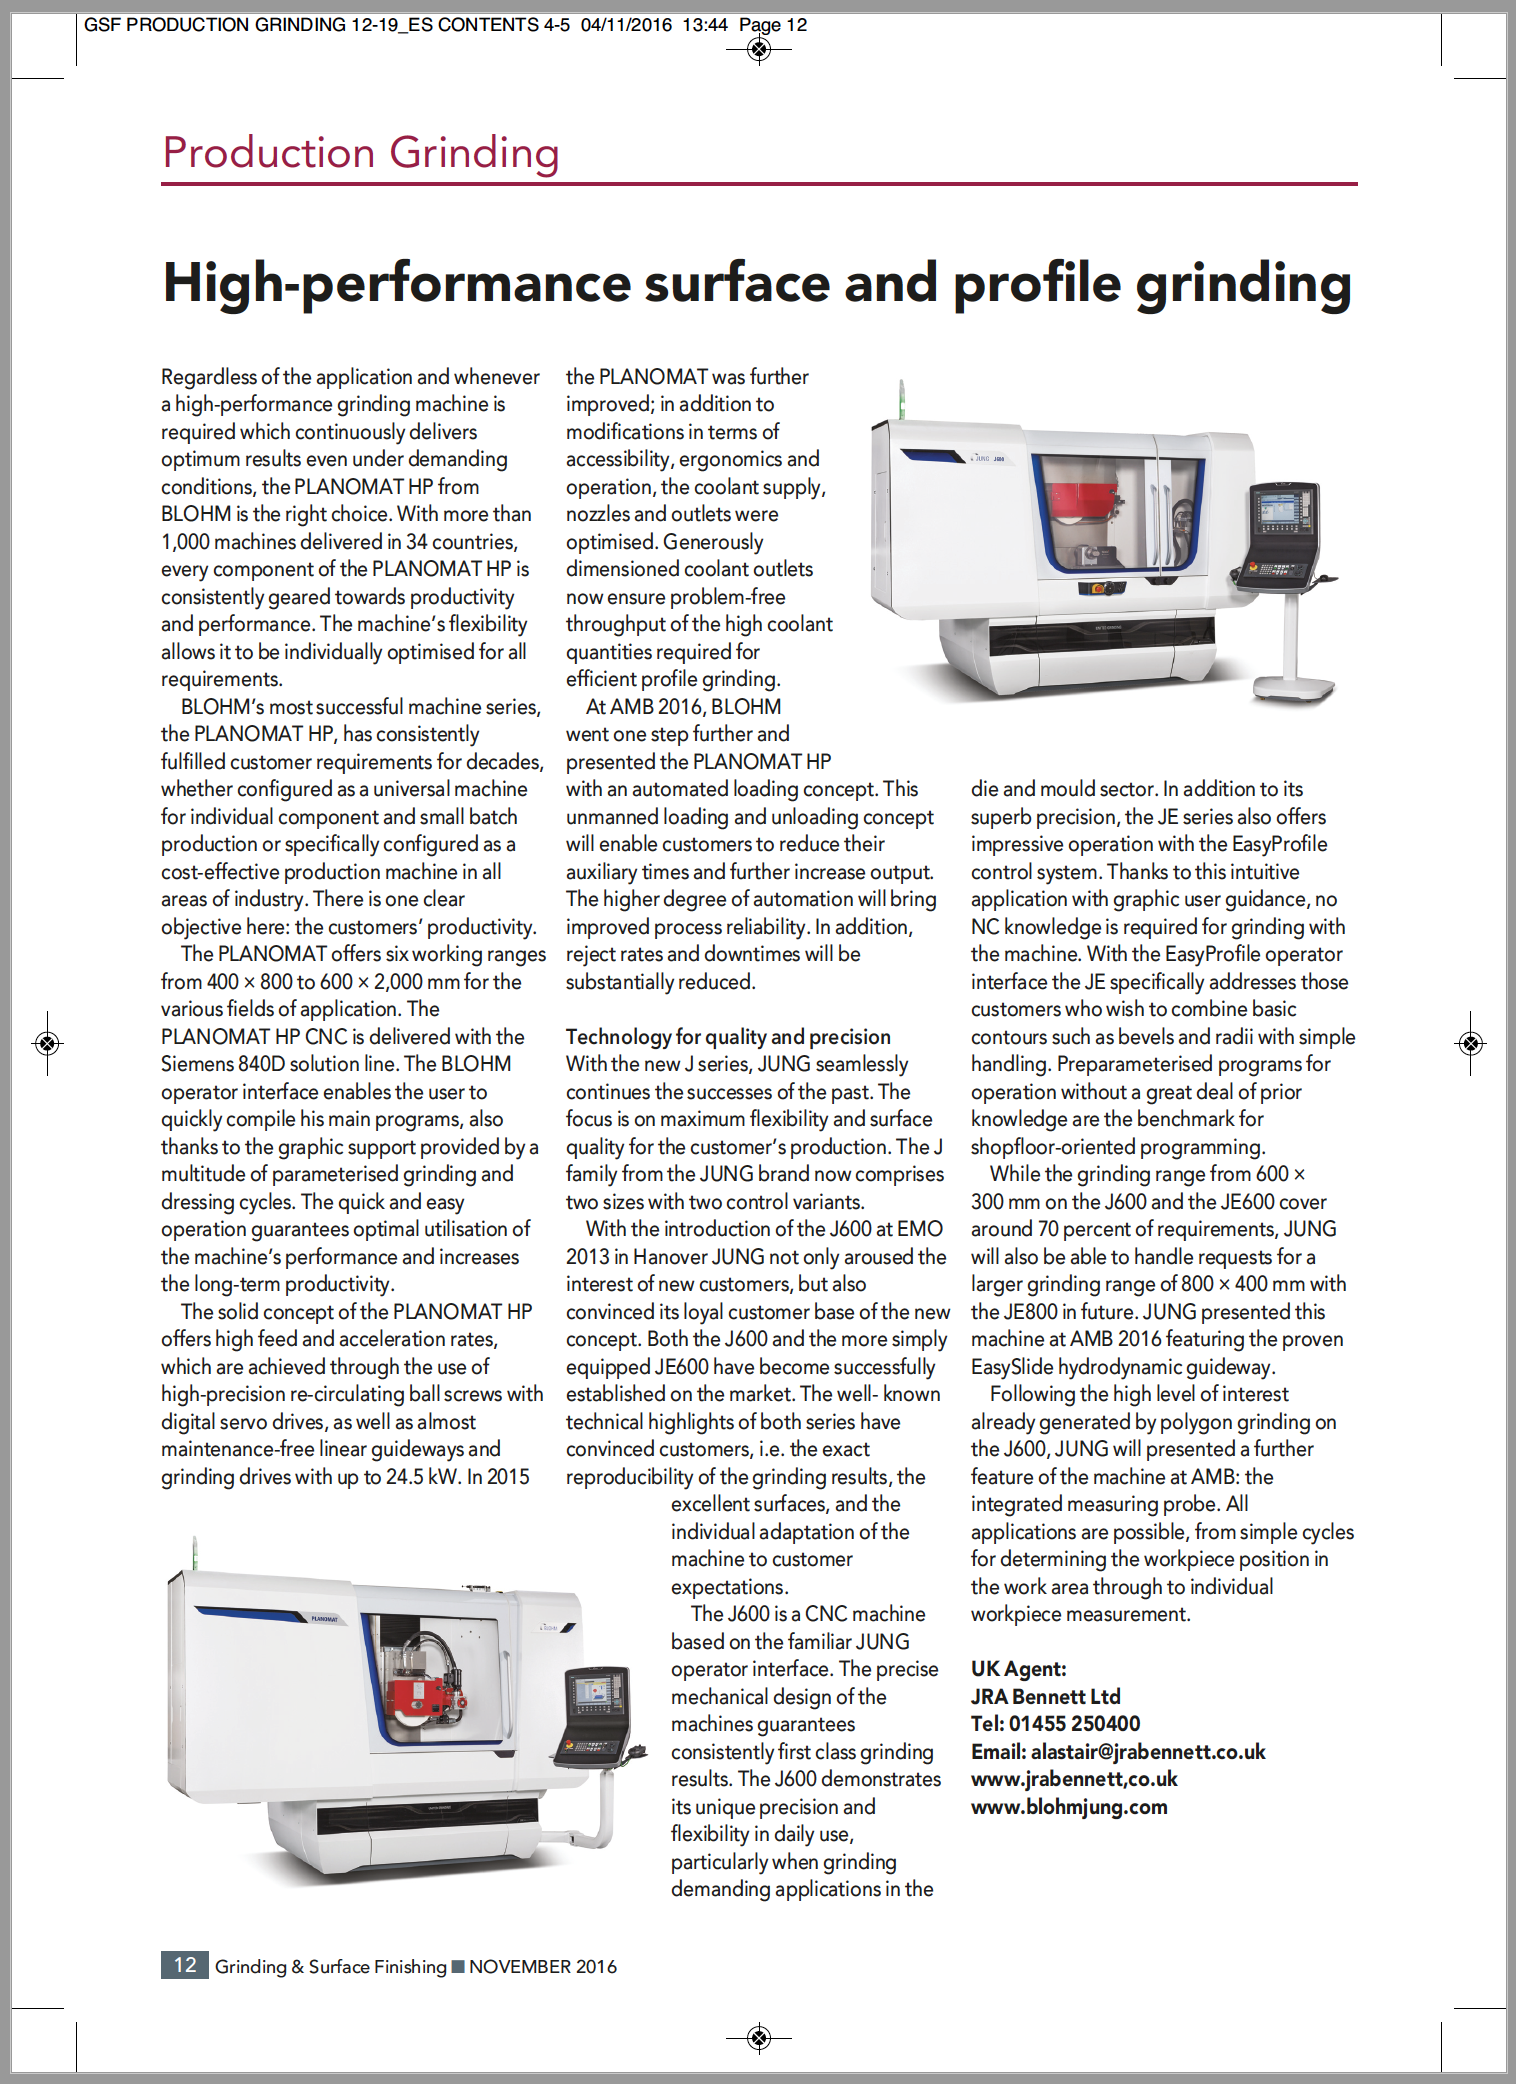 High performance surface and profile grinding